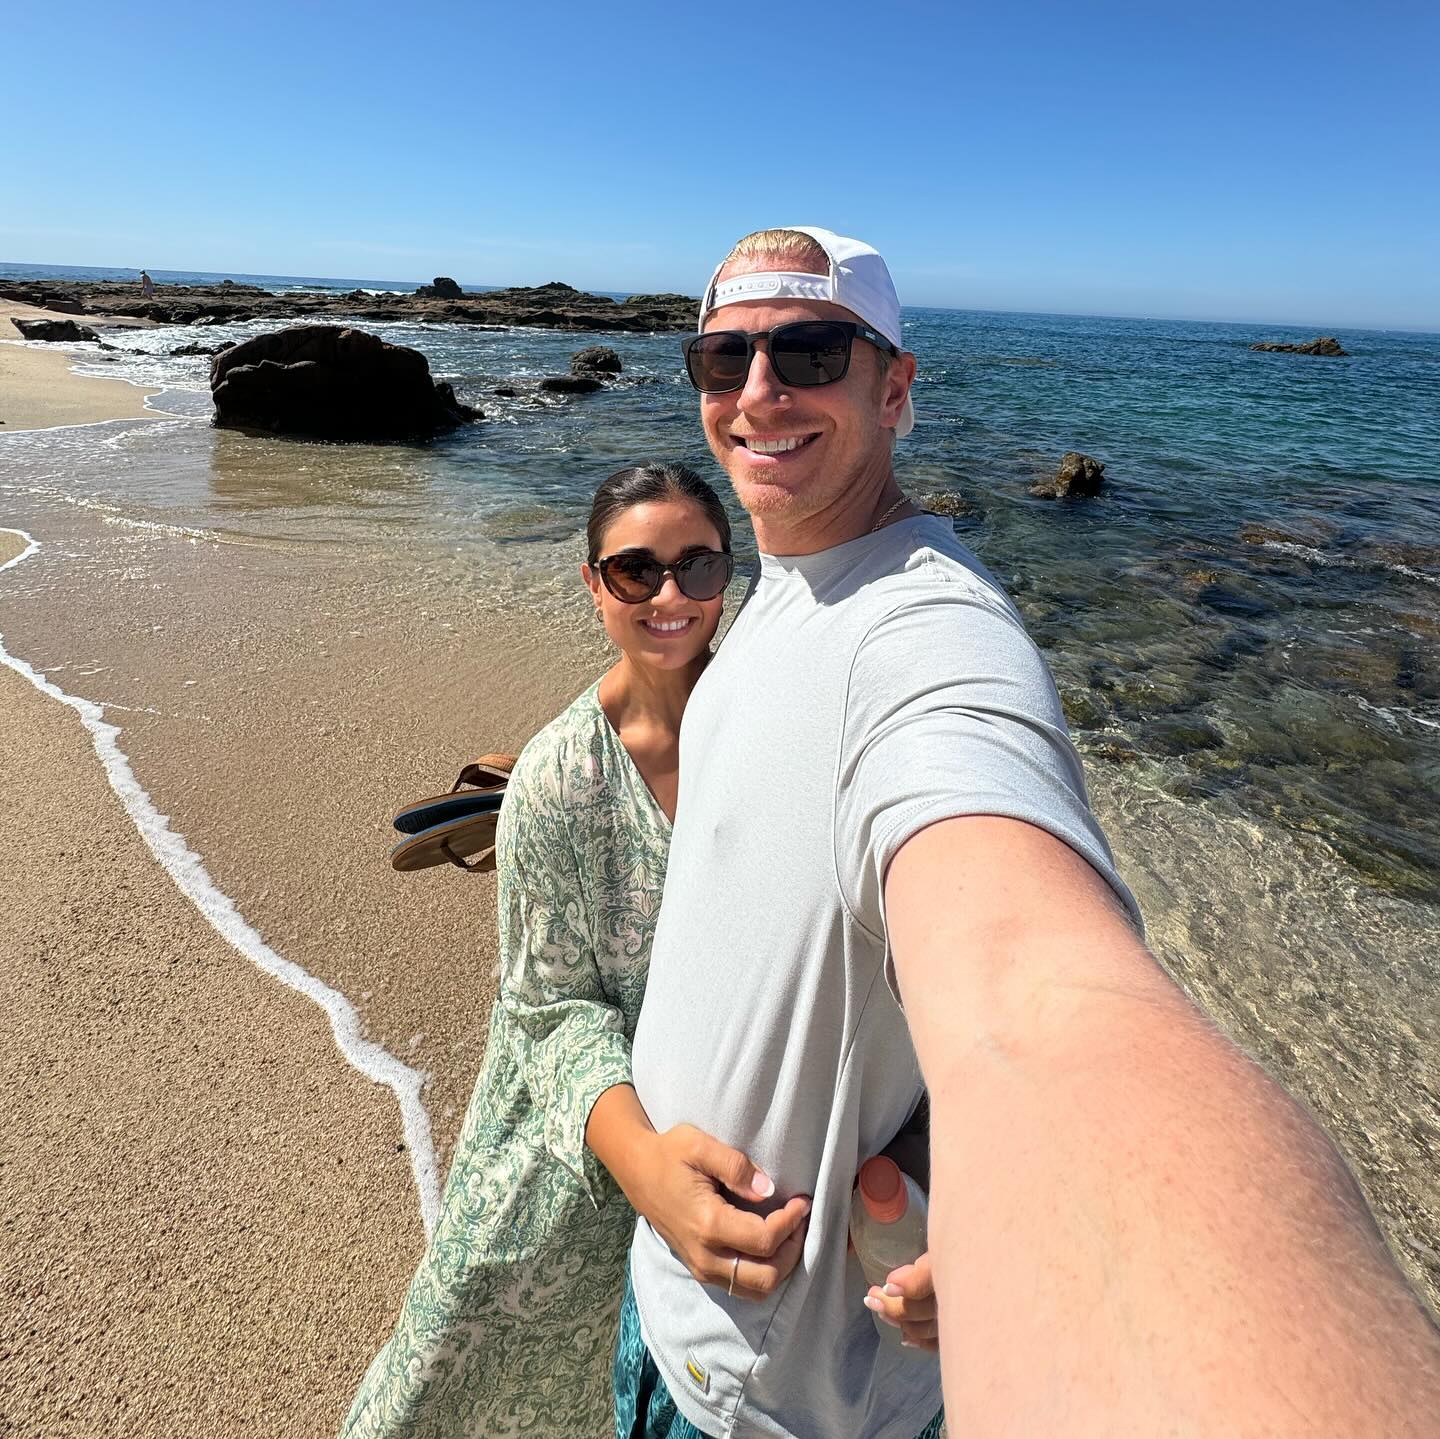 Sean and Catherine Lowe on their 10th anniversary special vacation